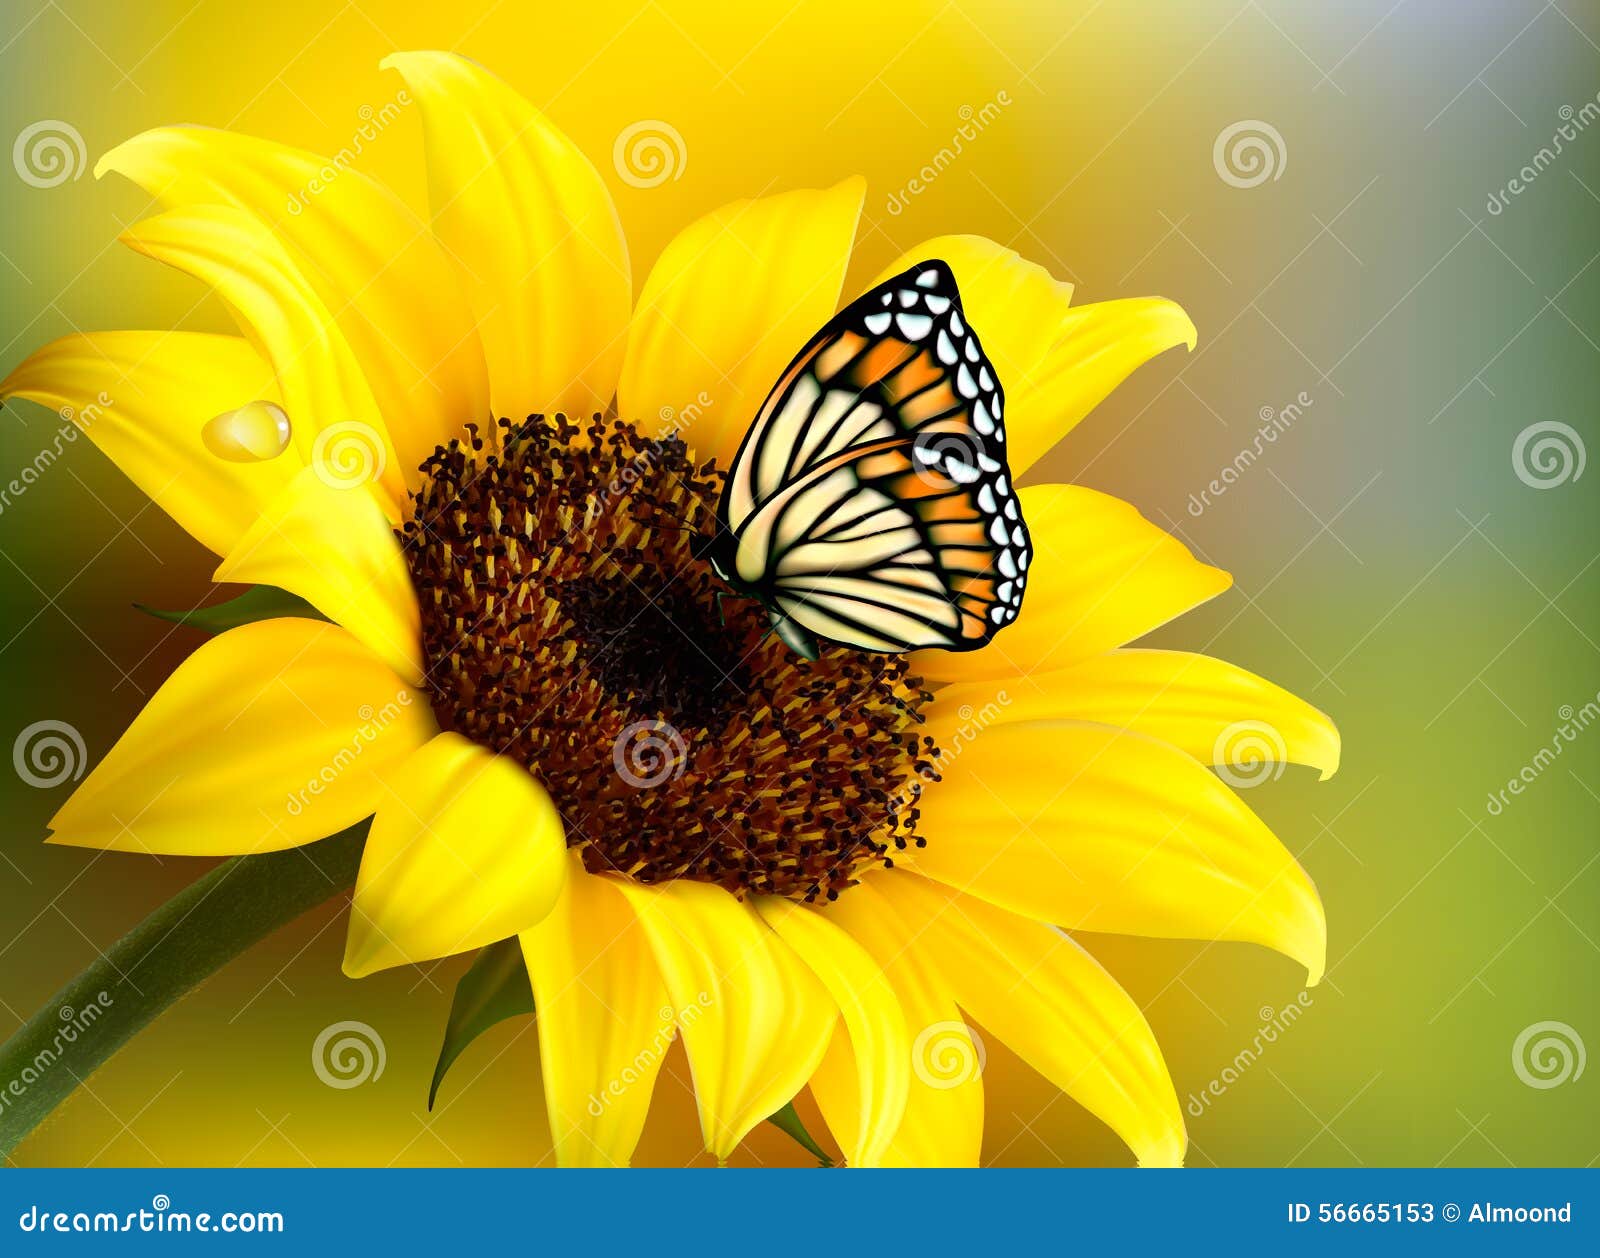 Yellow Sunflower With A Butterfly. Stock Vector - Image: 56665153